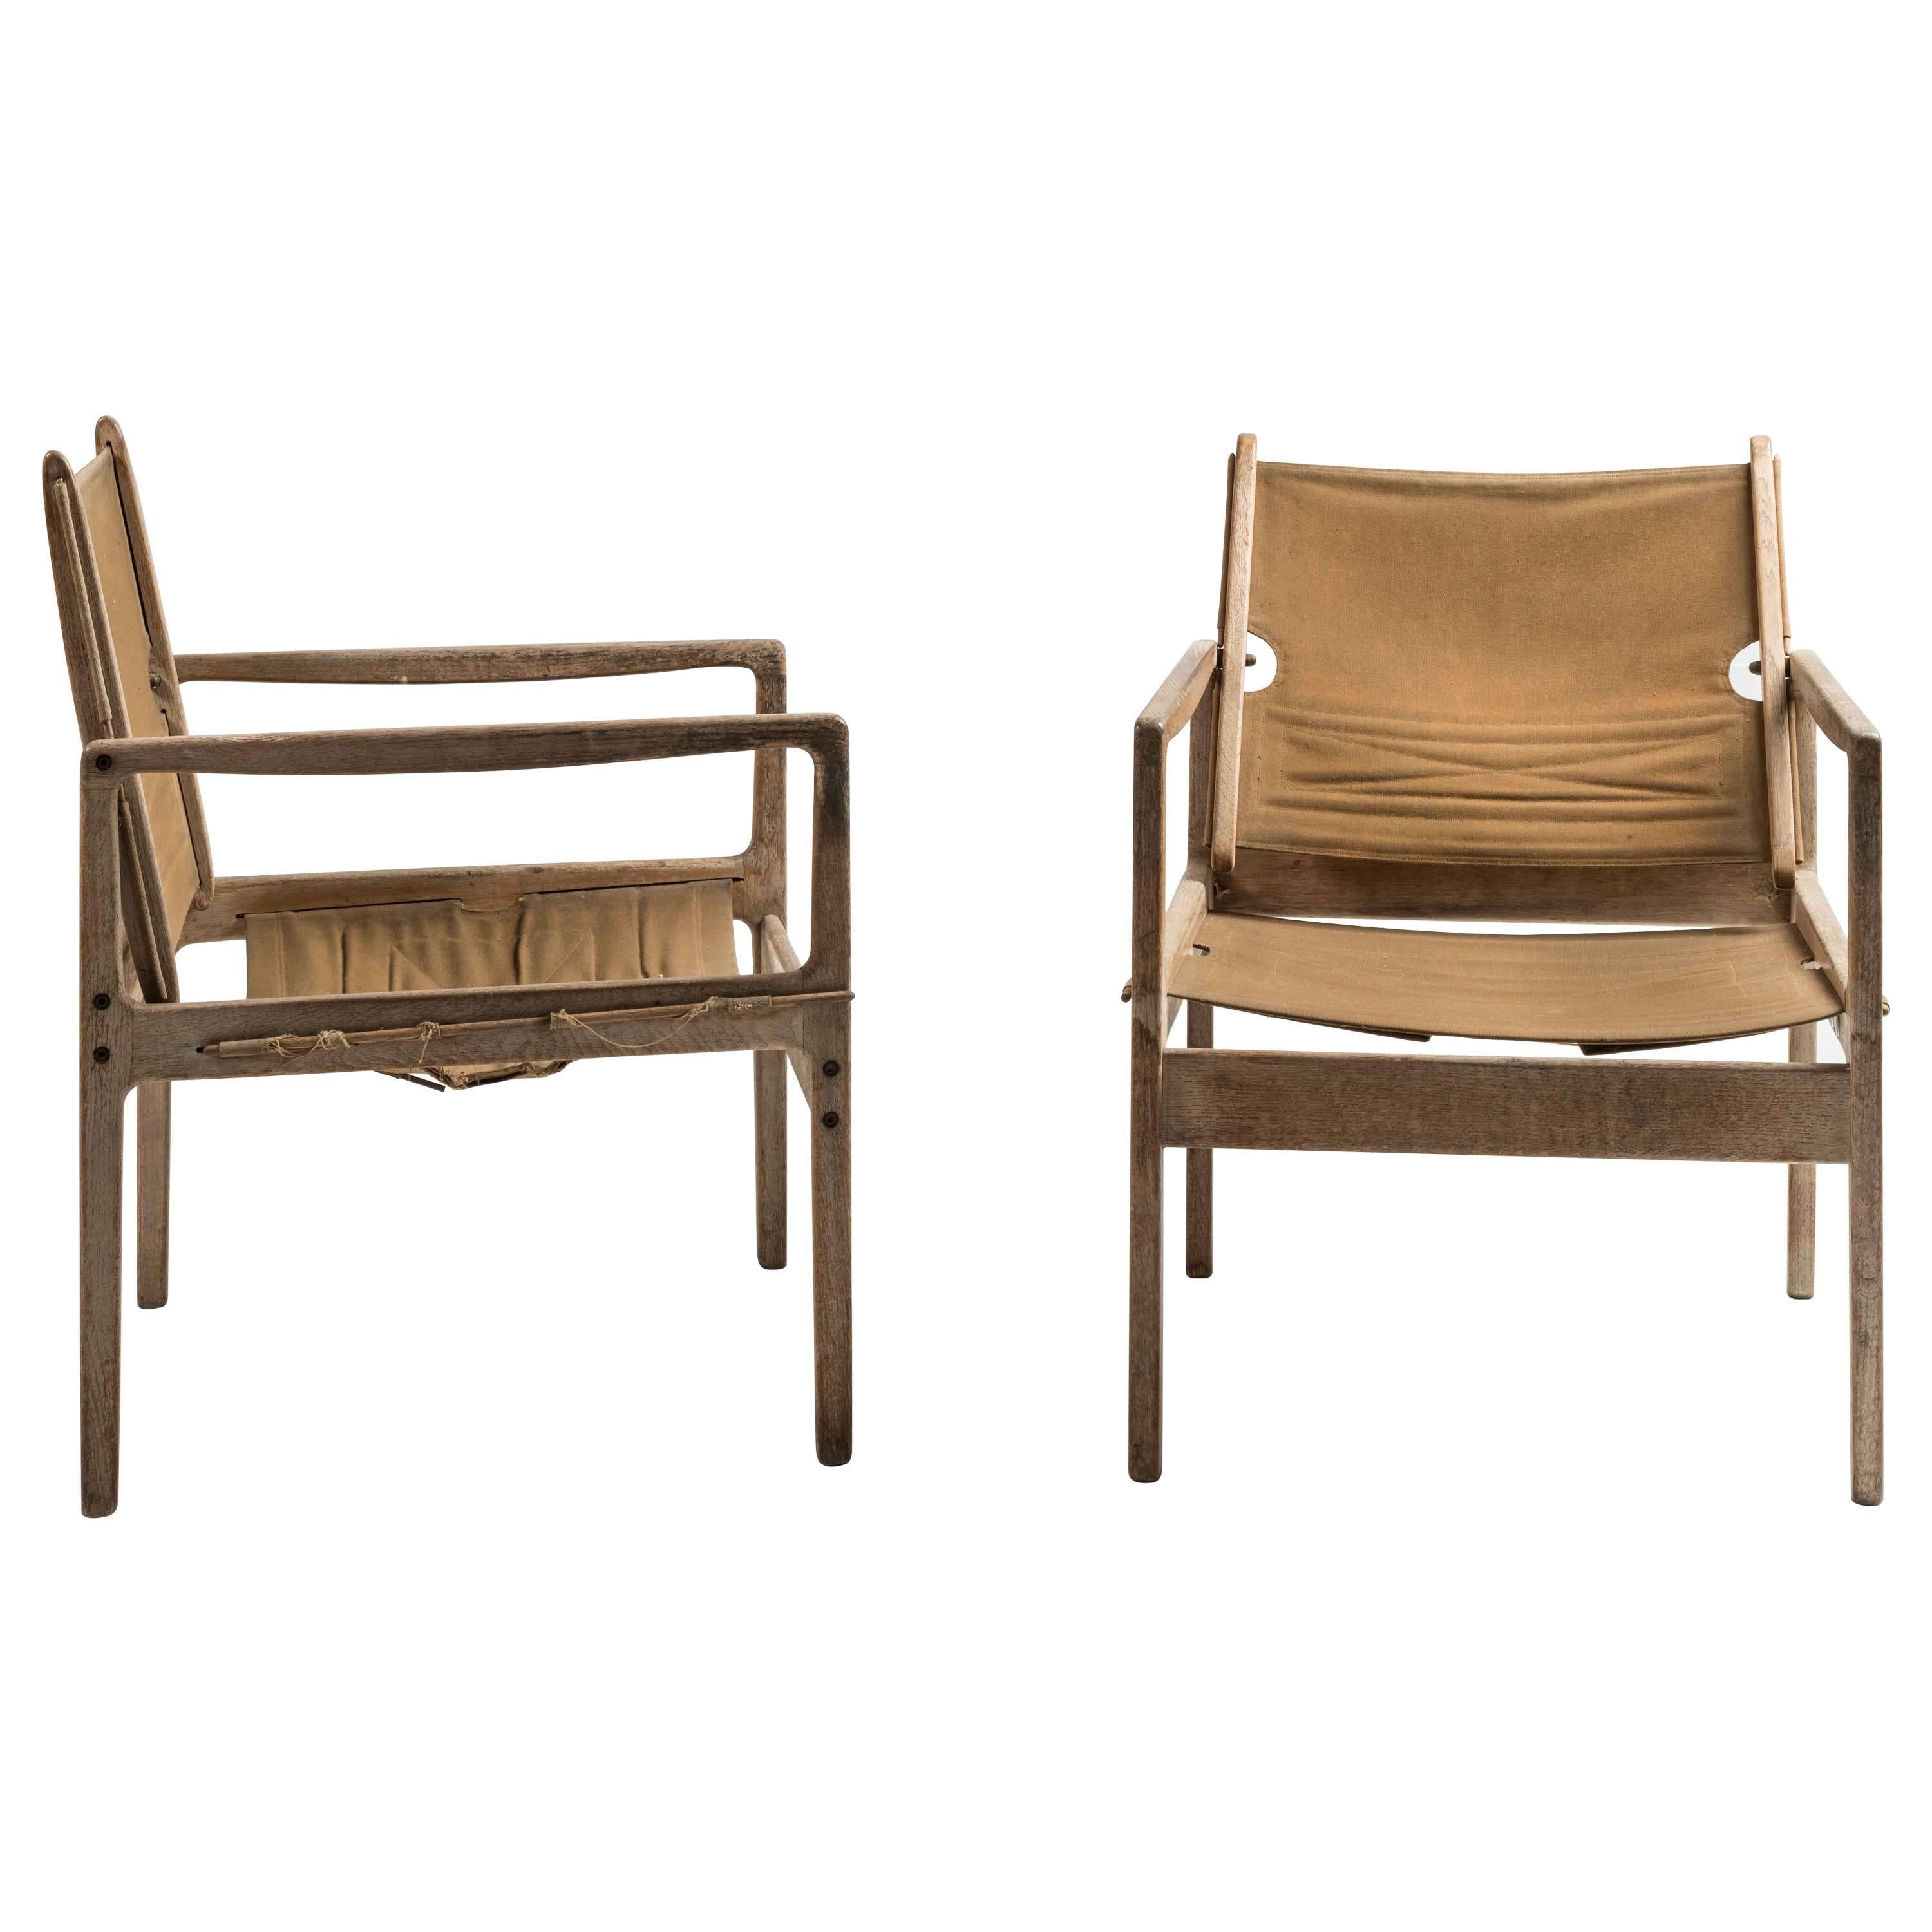 Pair of Safari Chairs by Ole Wanscher for Poul Jeppesen Møbelfabrik